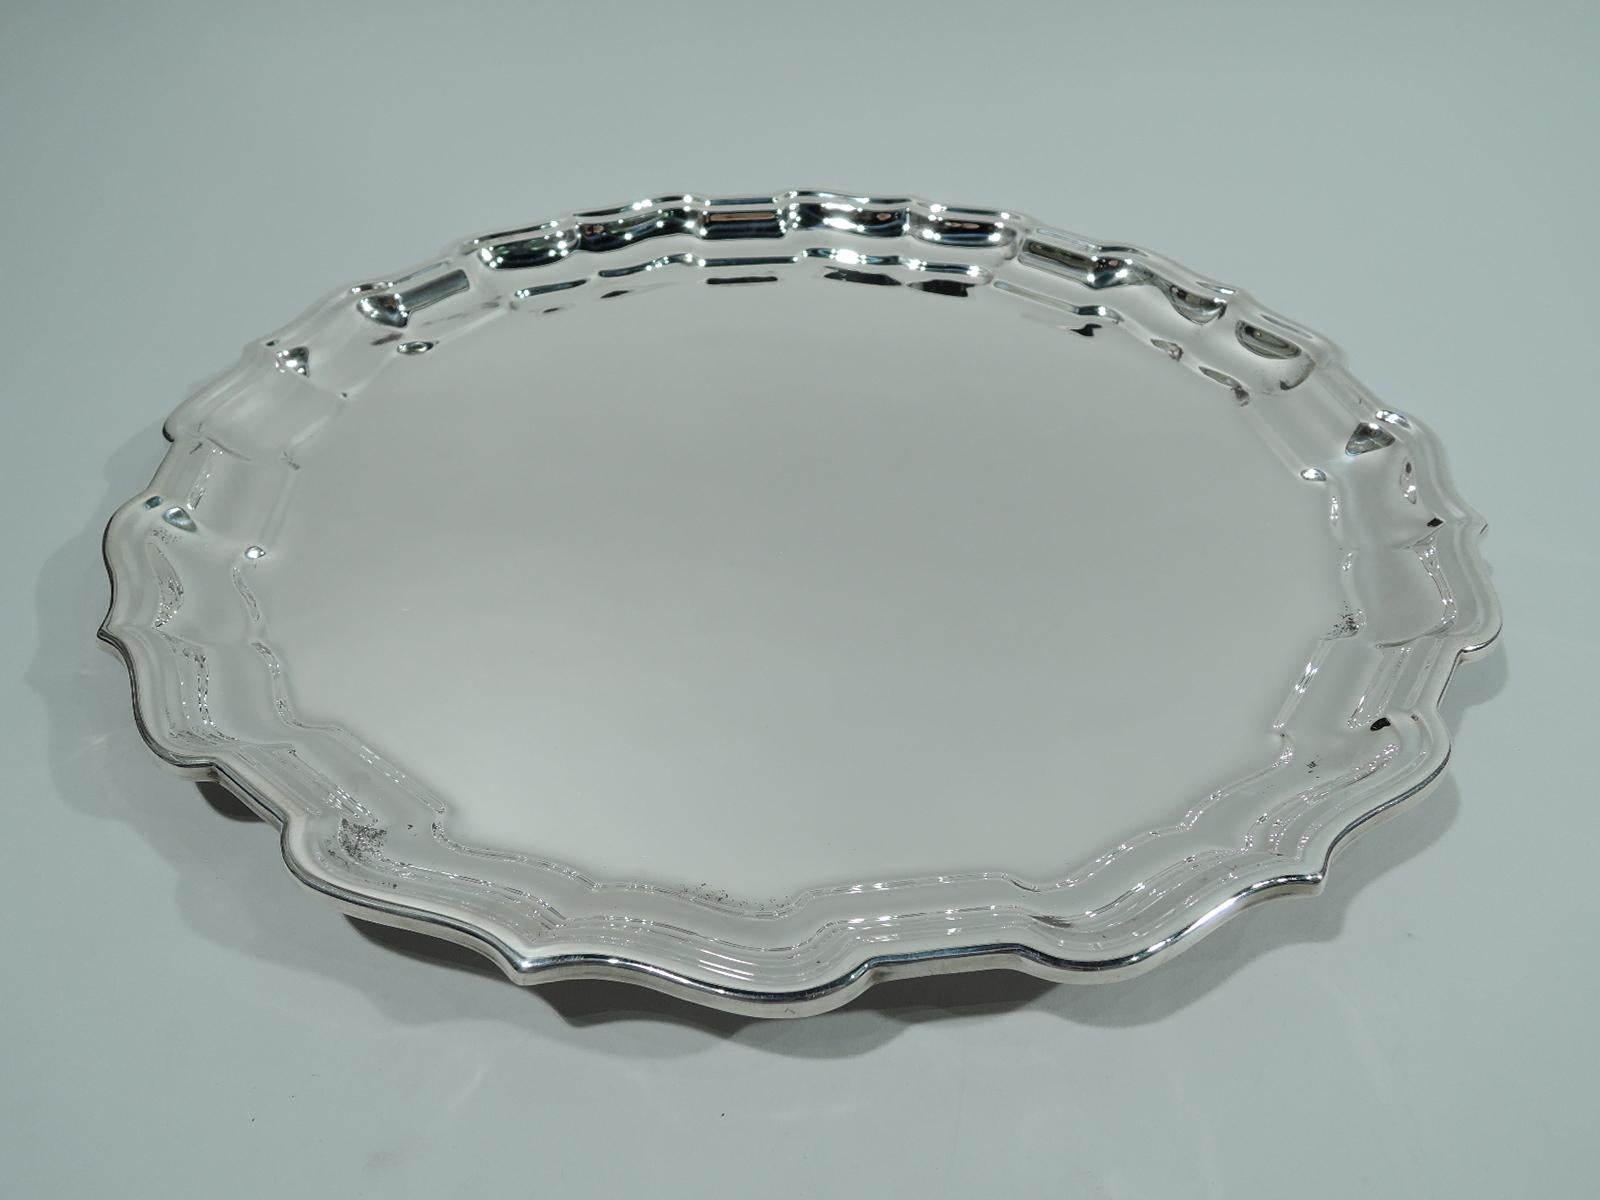 Chippendale sterling silver tray. Made by Reed & Barton in Taunton, Mass. Round with molded curvilinear ogee piecrust rim. Fully marked including maker’s stamp, pattern name, and no. X366. Weight: 29 troy ounces.